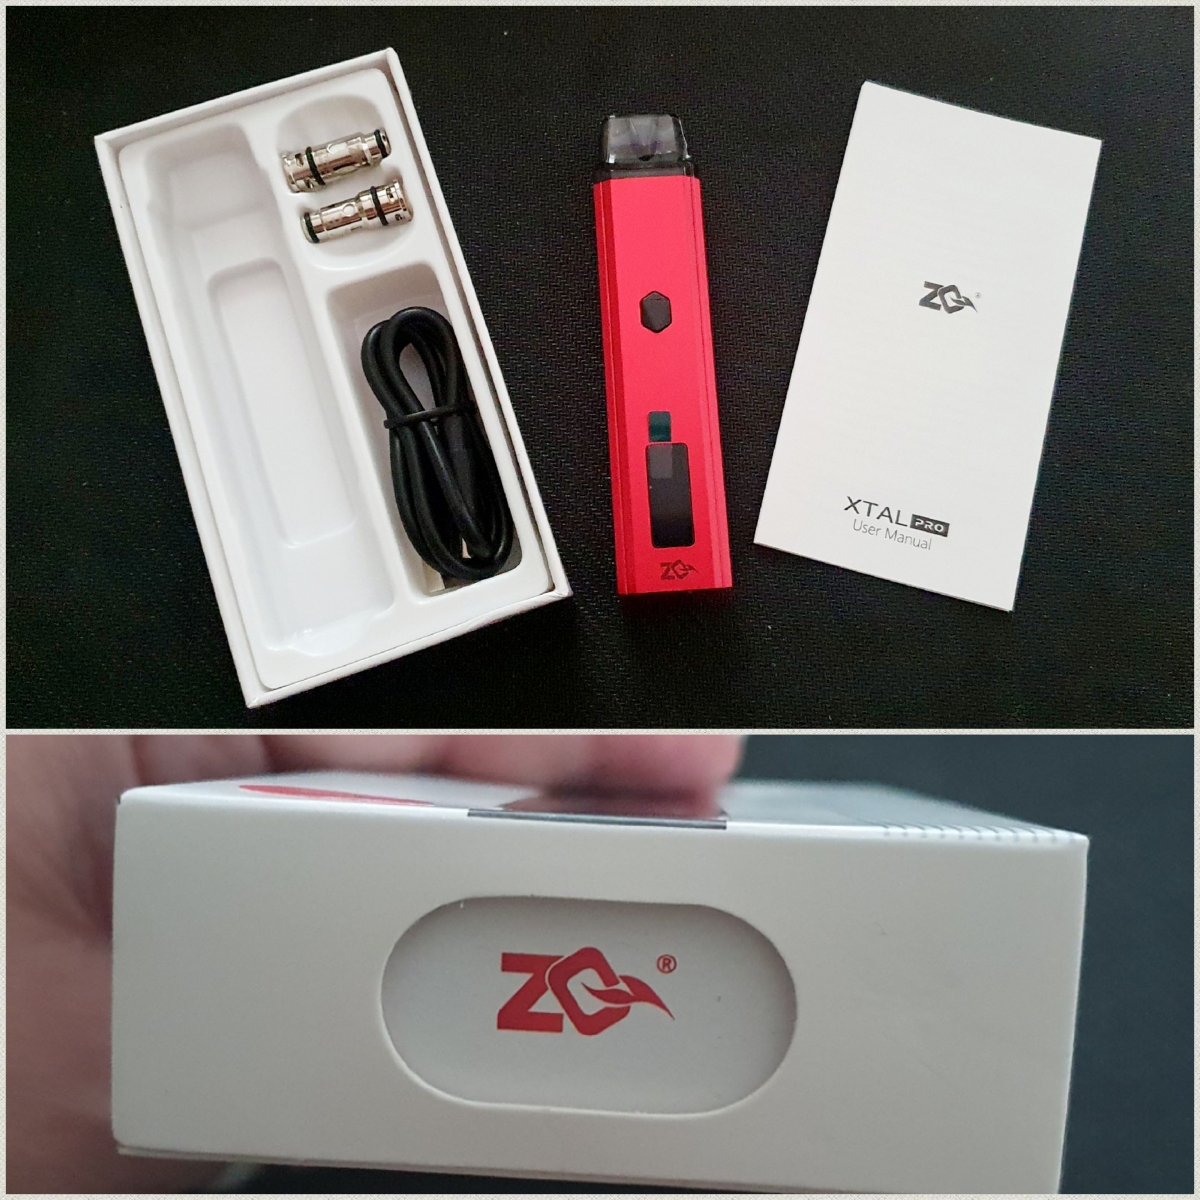 ZQ Vapor Xtal Pro Pod System contents and packaging